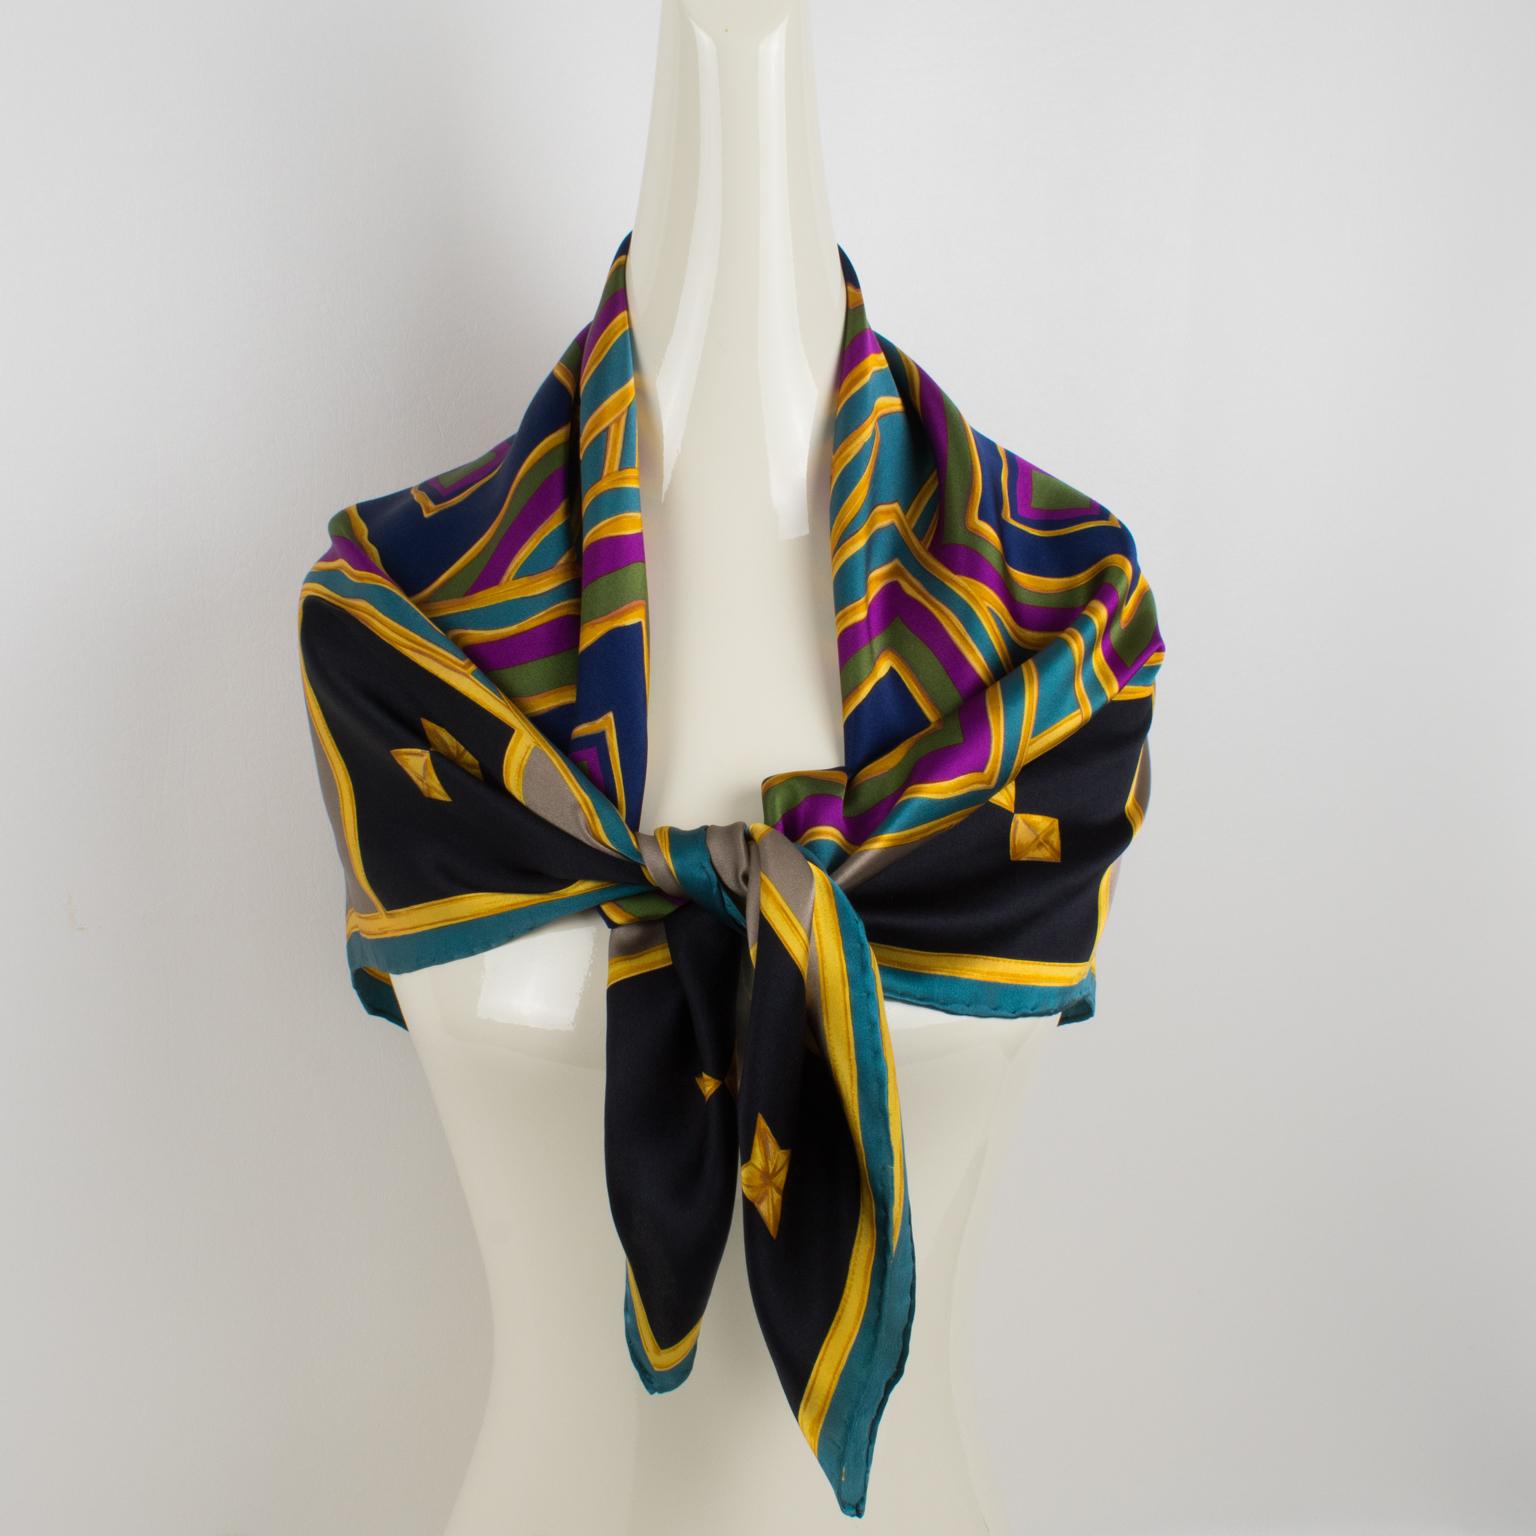 This elegant Lanvin Paris silk scarf in multicolor tones features an intricate geometric design print. This fashion accessory has the Lanvin Paris logo mark on the bottom right corner. The combination of navy blue, fuchsia pink, turquoise, black,